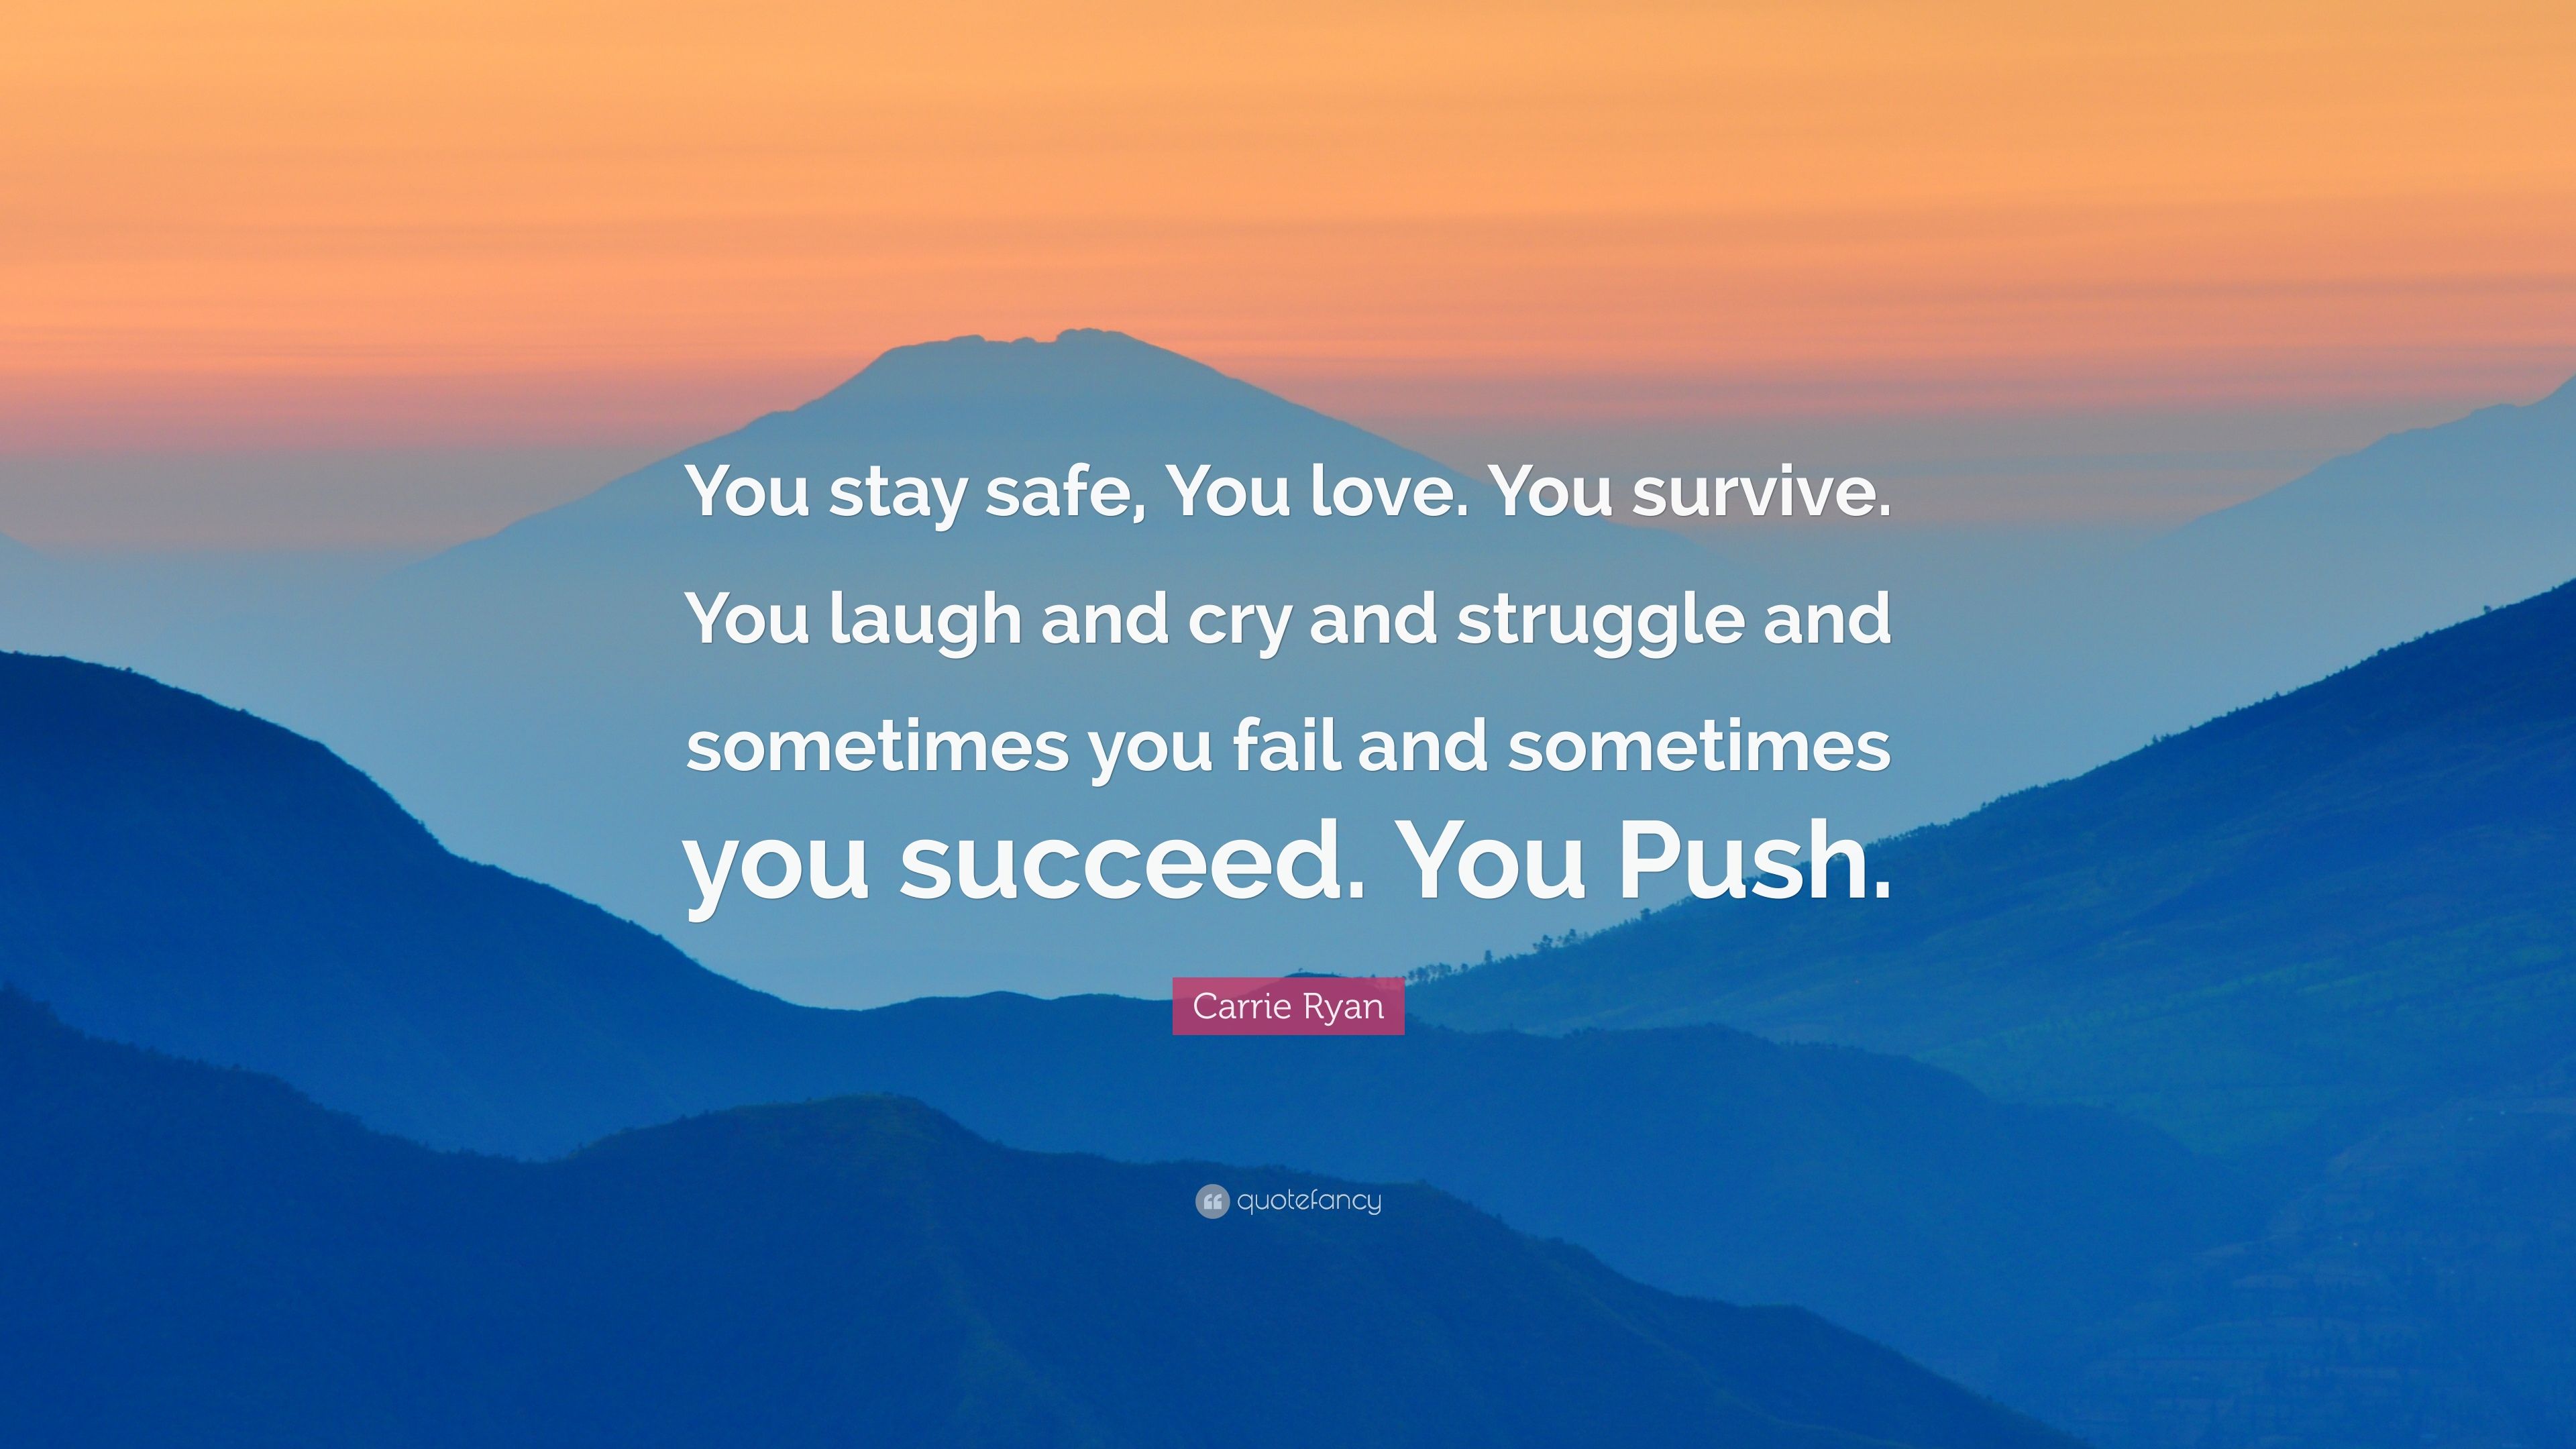 Carrie Ryan Quote: “You stay safe, You love. You survive. You